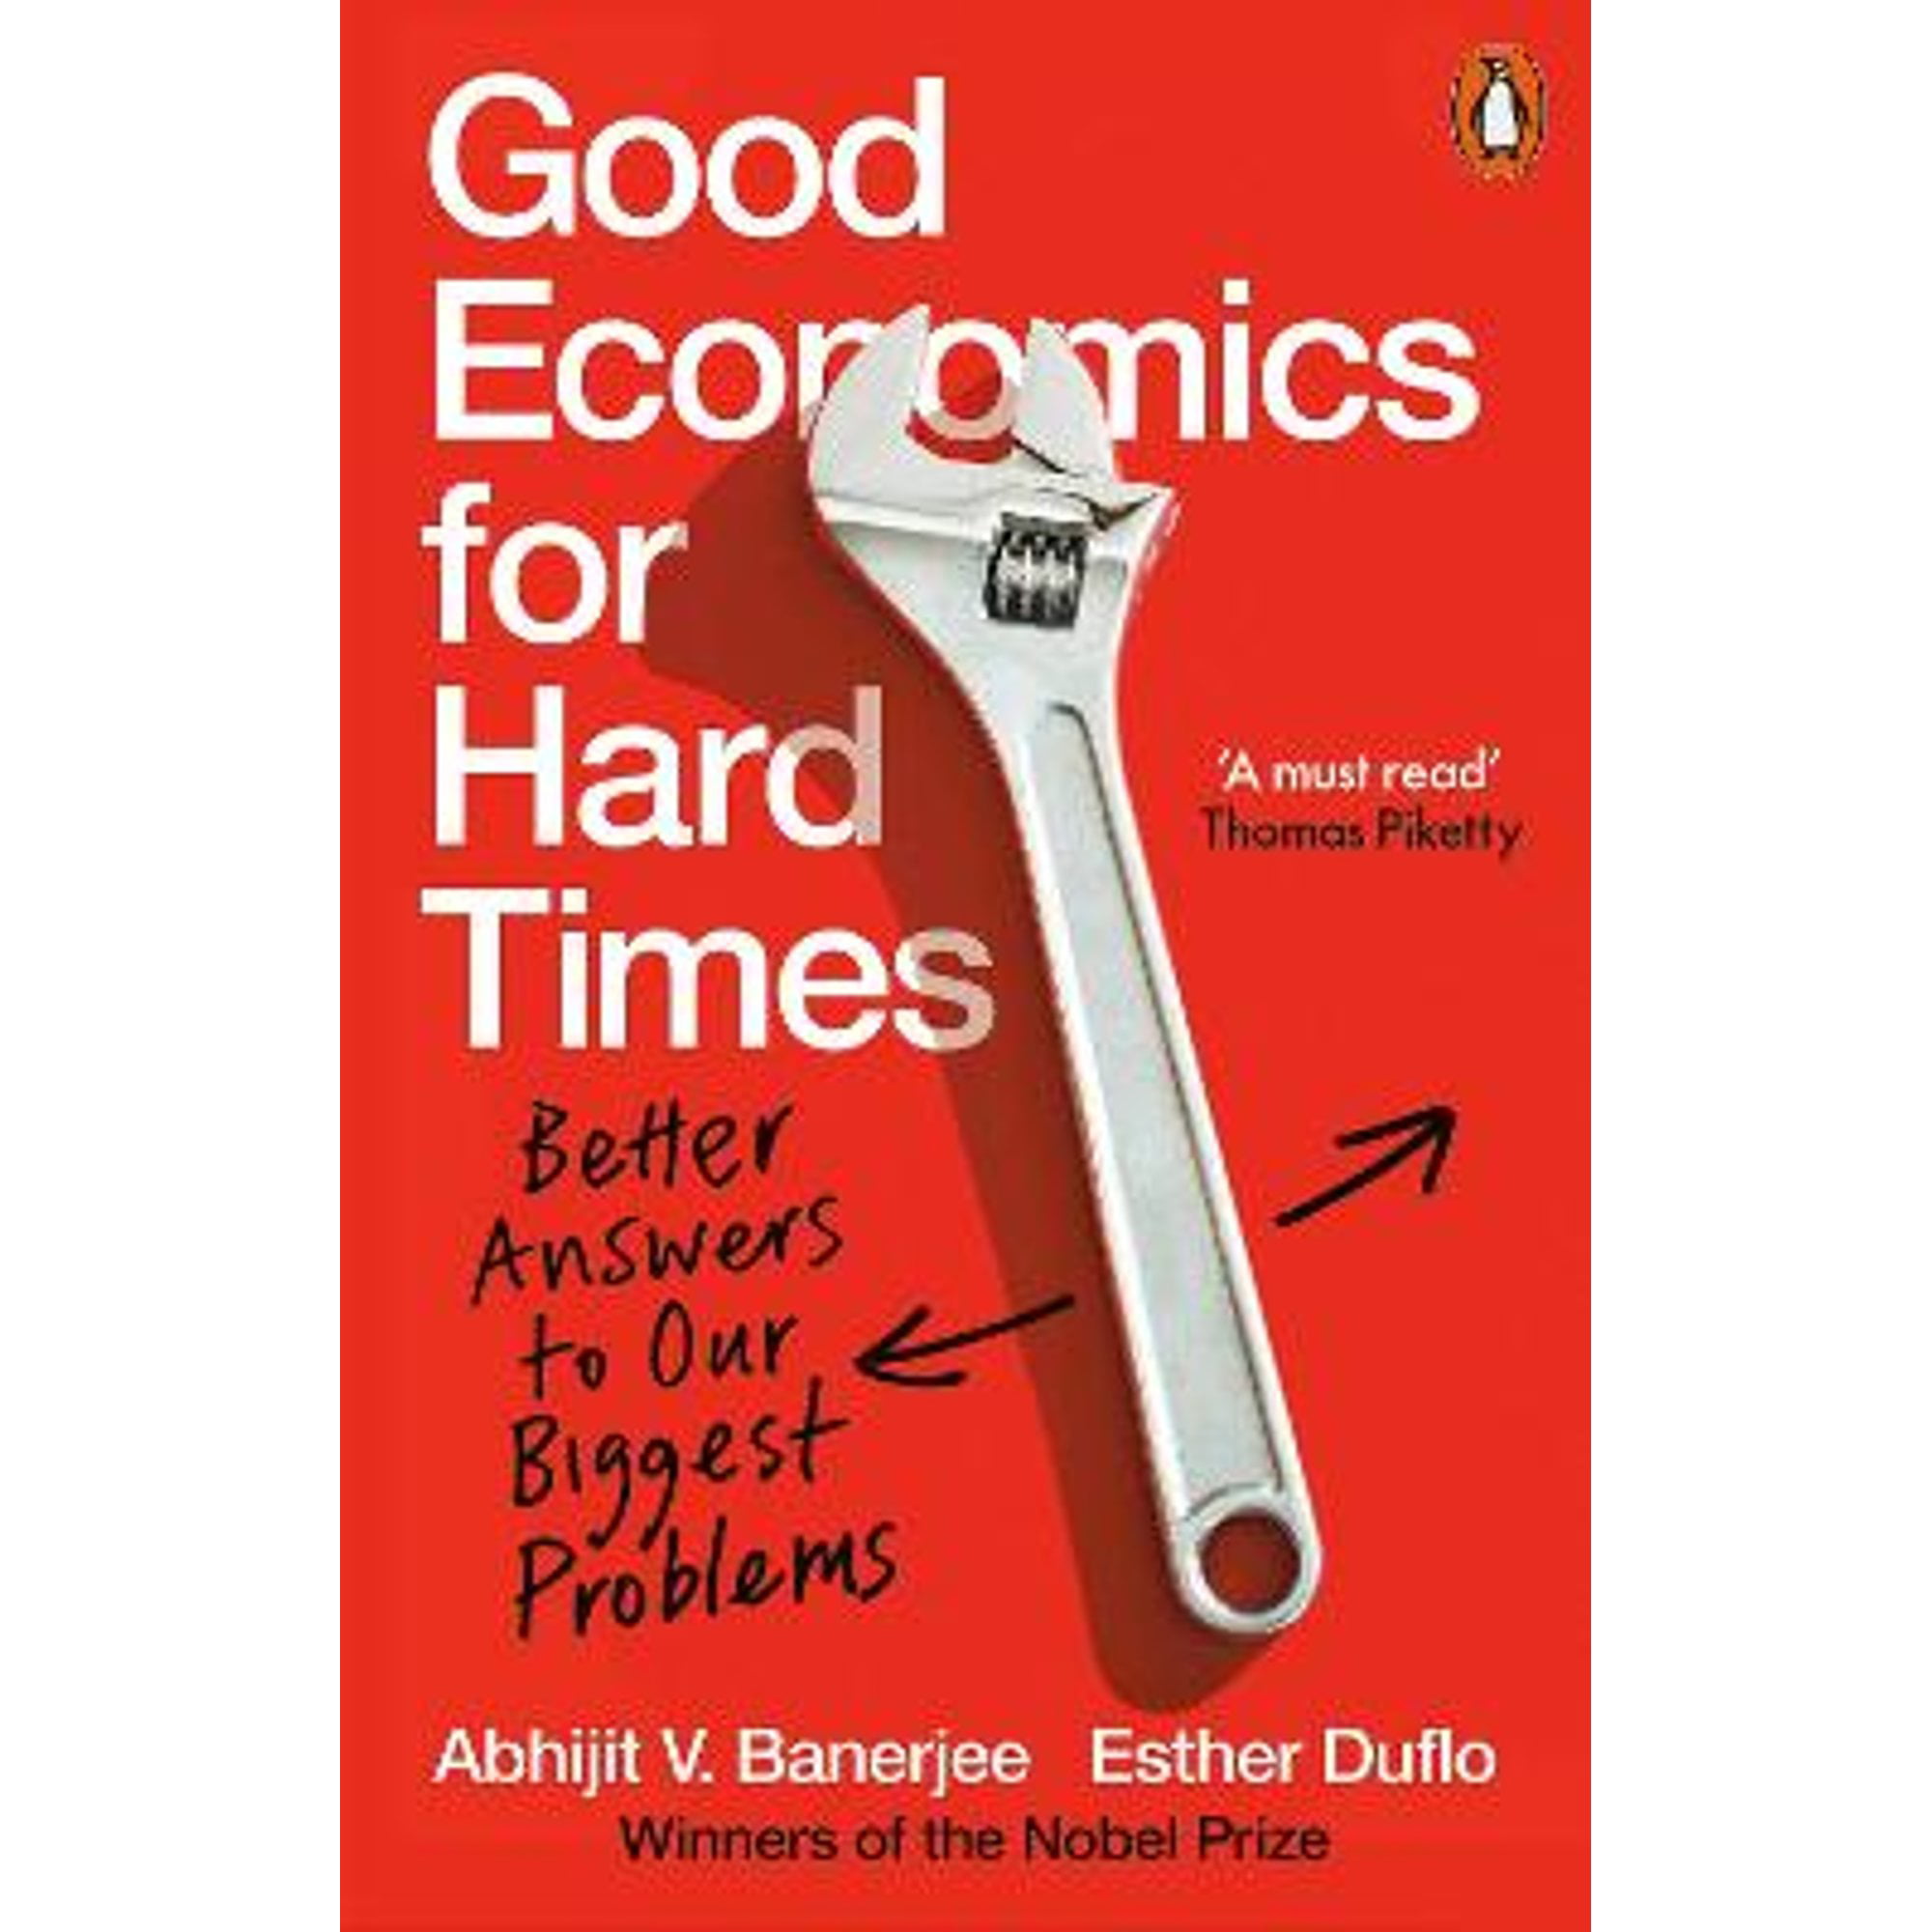 Pre-Owned Good Economics for Hard Times: Better Answers to Our Biggest Problems (Paperback 9780141986197) by Abhijit V. Banerjee, Esther Duflo